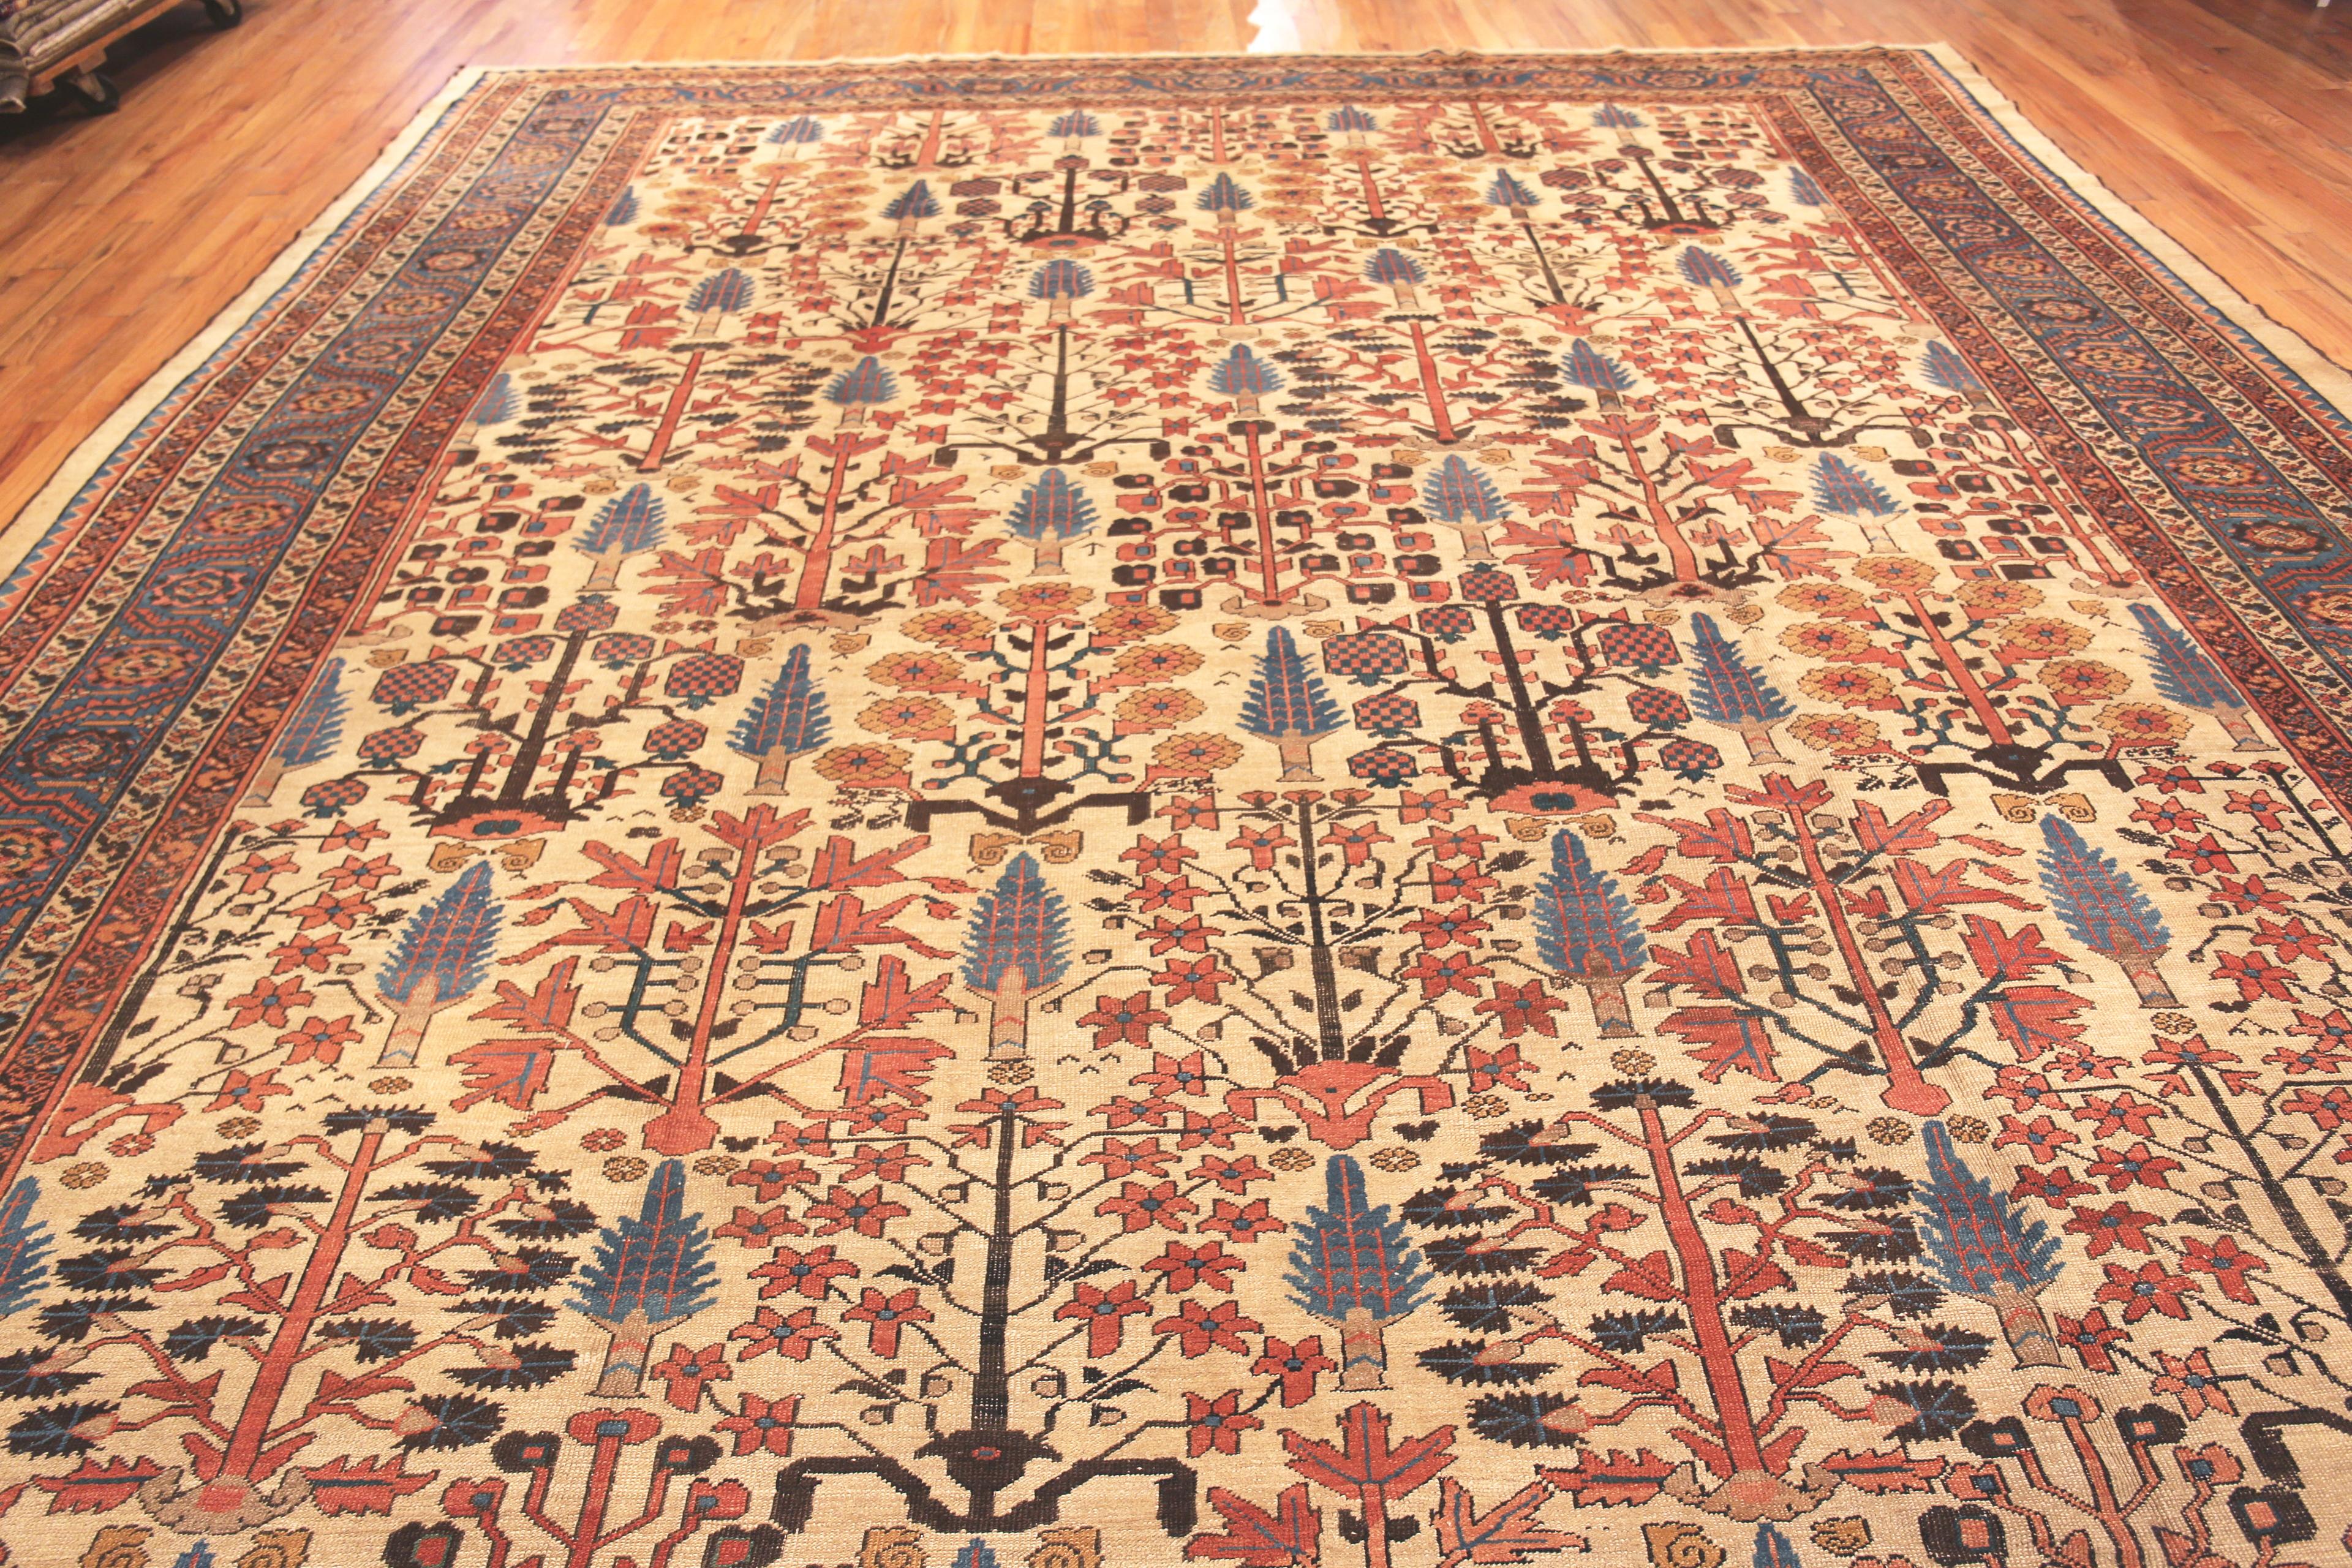 Beautiful Cypress Tree Design Large Antique Persian Bakshaish Rug, Country of Origin: Persia, Circa date: 1880 – Bakshaish is one of the oldest rug-weaving villages and is known for its artistic designs that feature many of the motifs you find